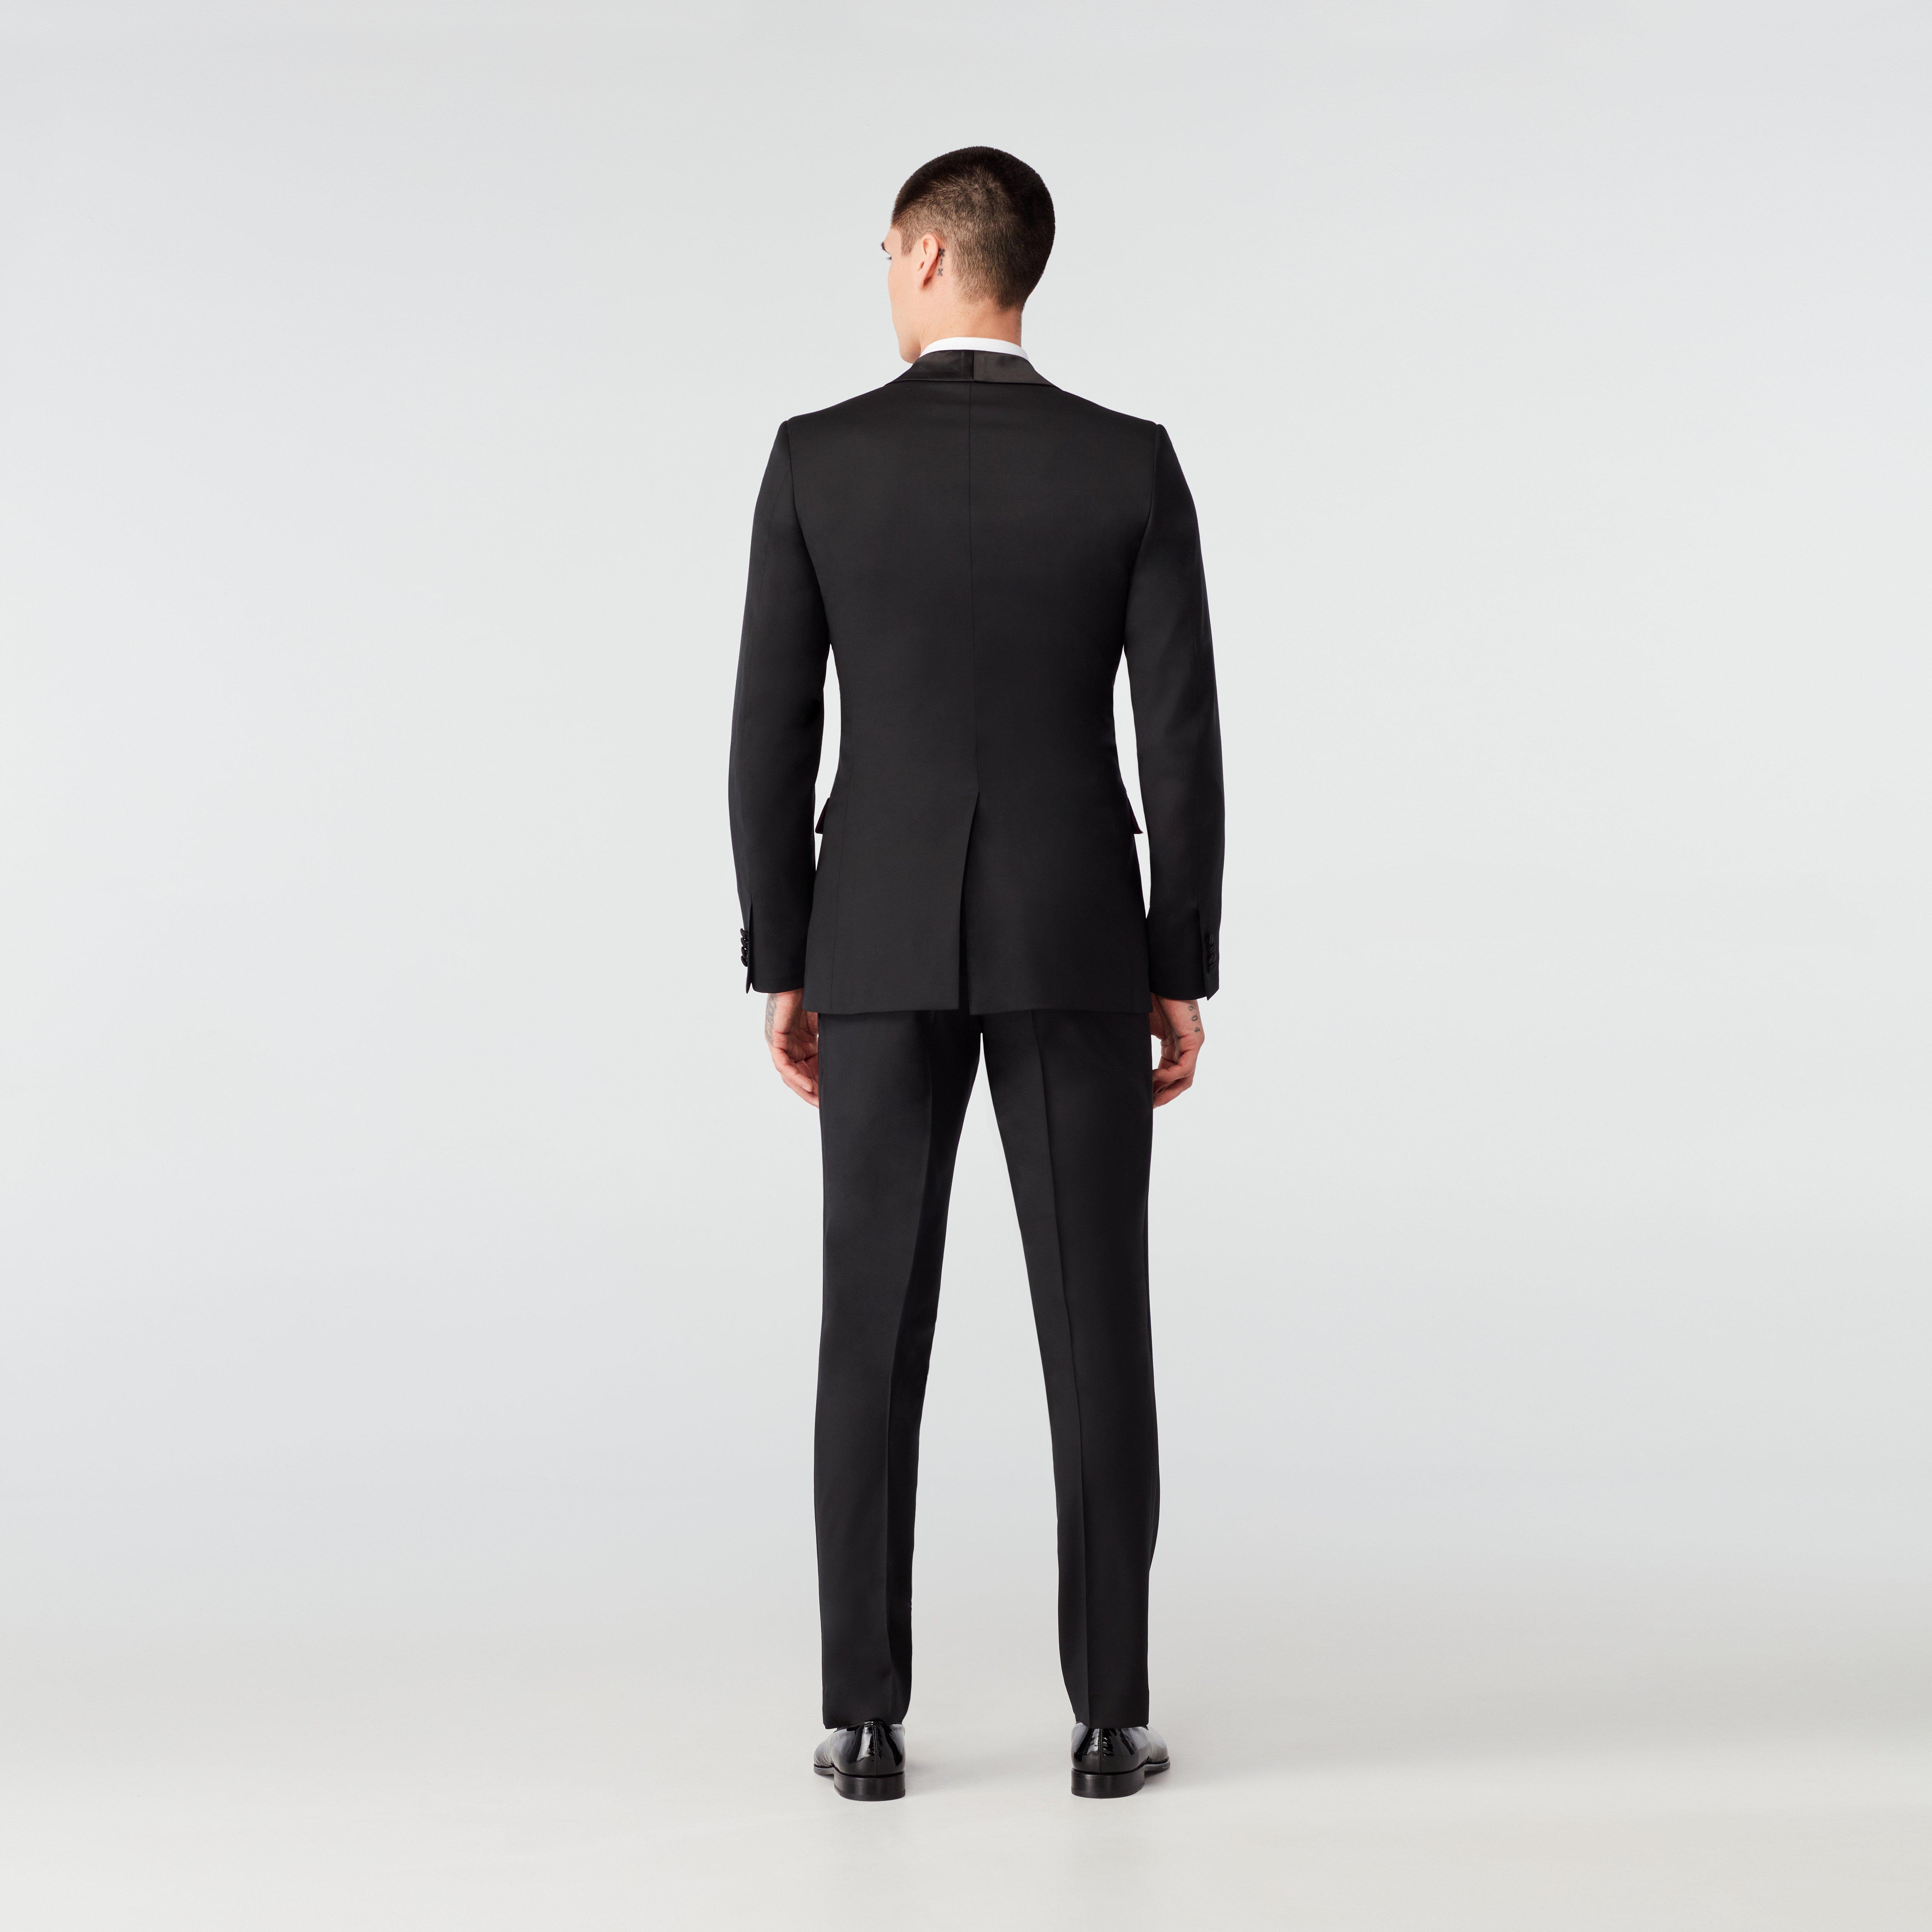 Custom Suits Made For You - Highworth Black Tuxedo | INDOCHINO